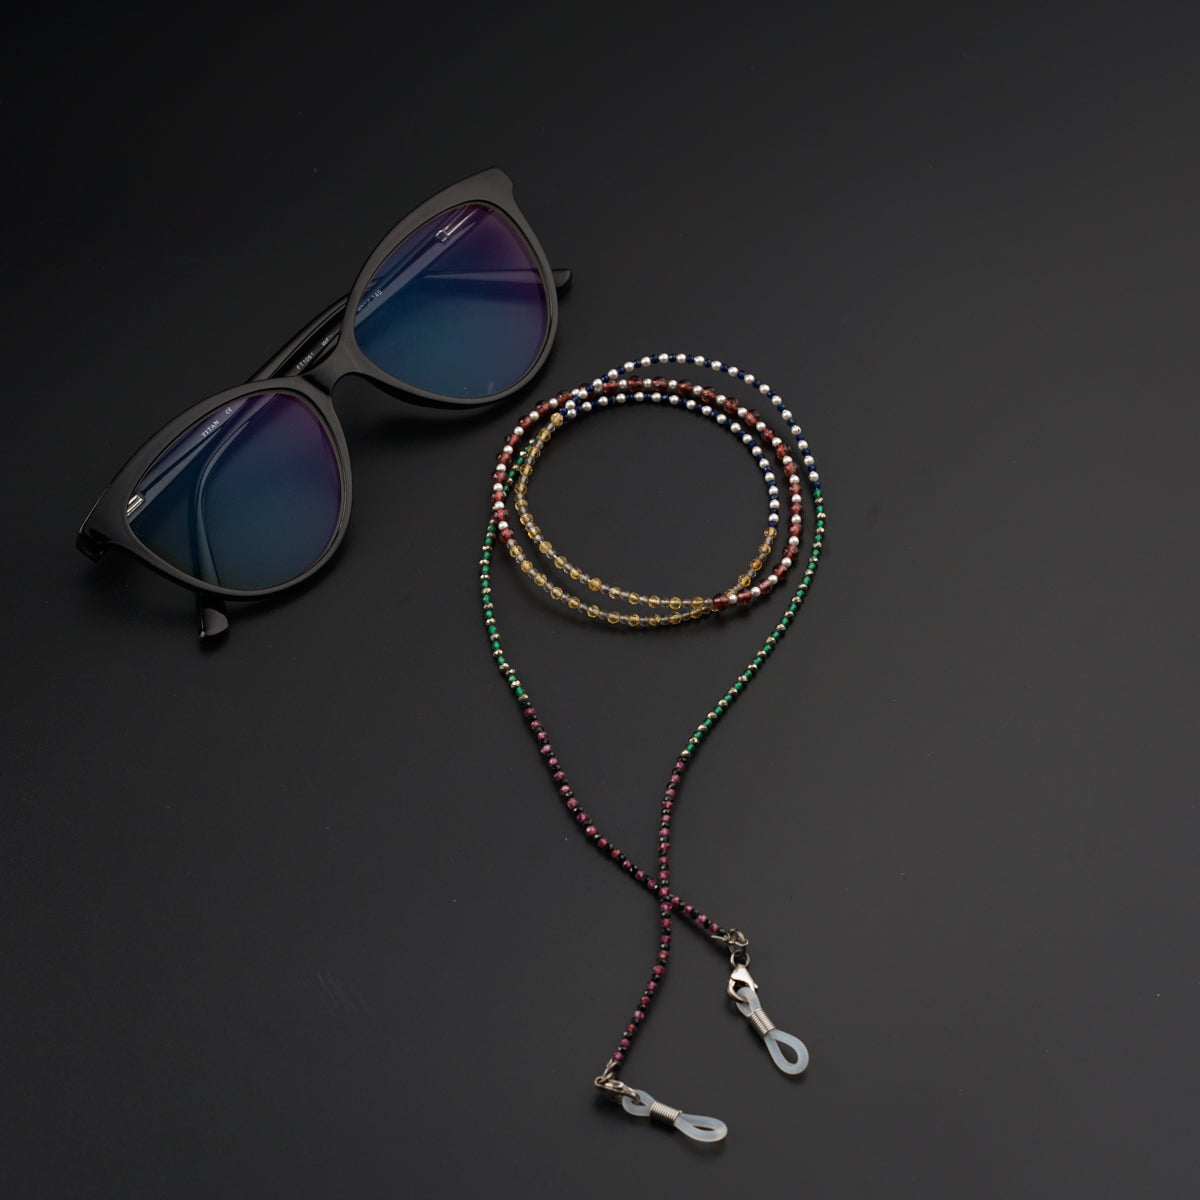 a pair of sunglasses and a beaded lanyard on a black surface